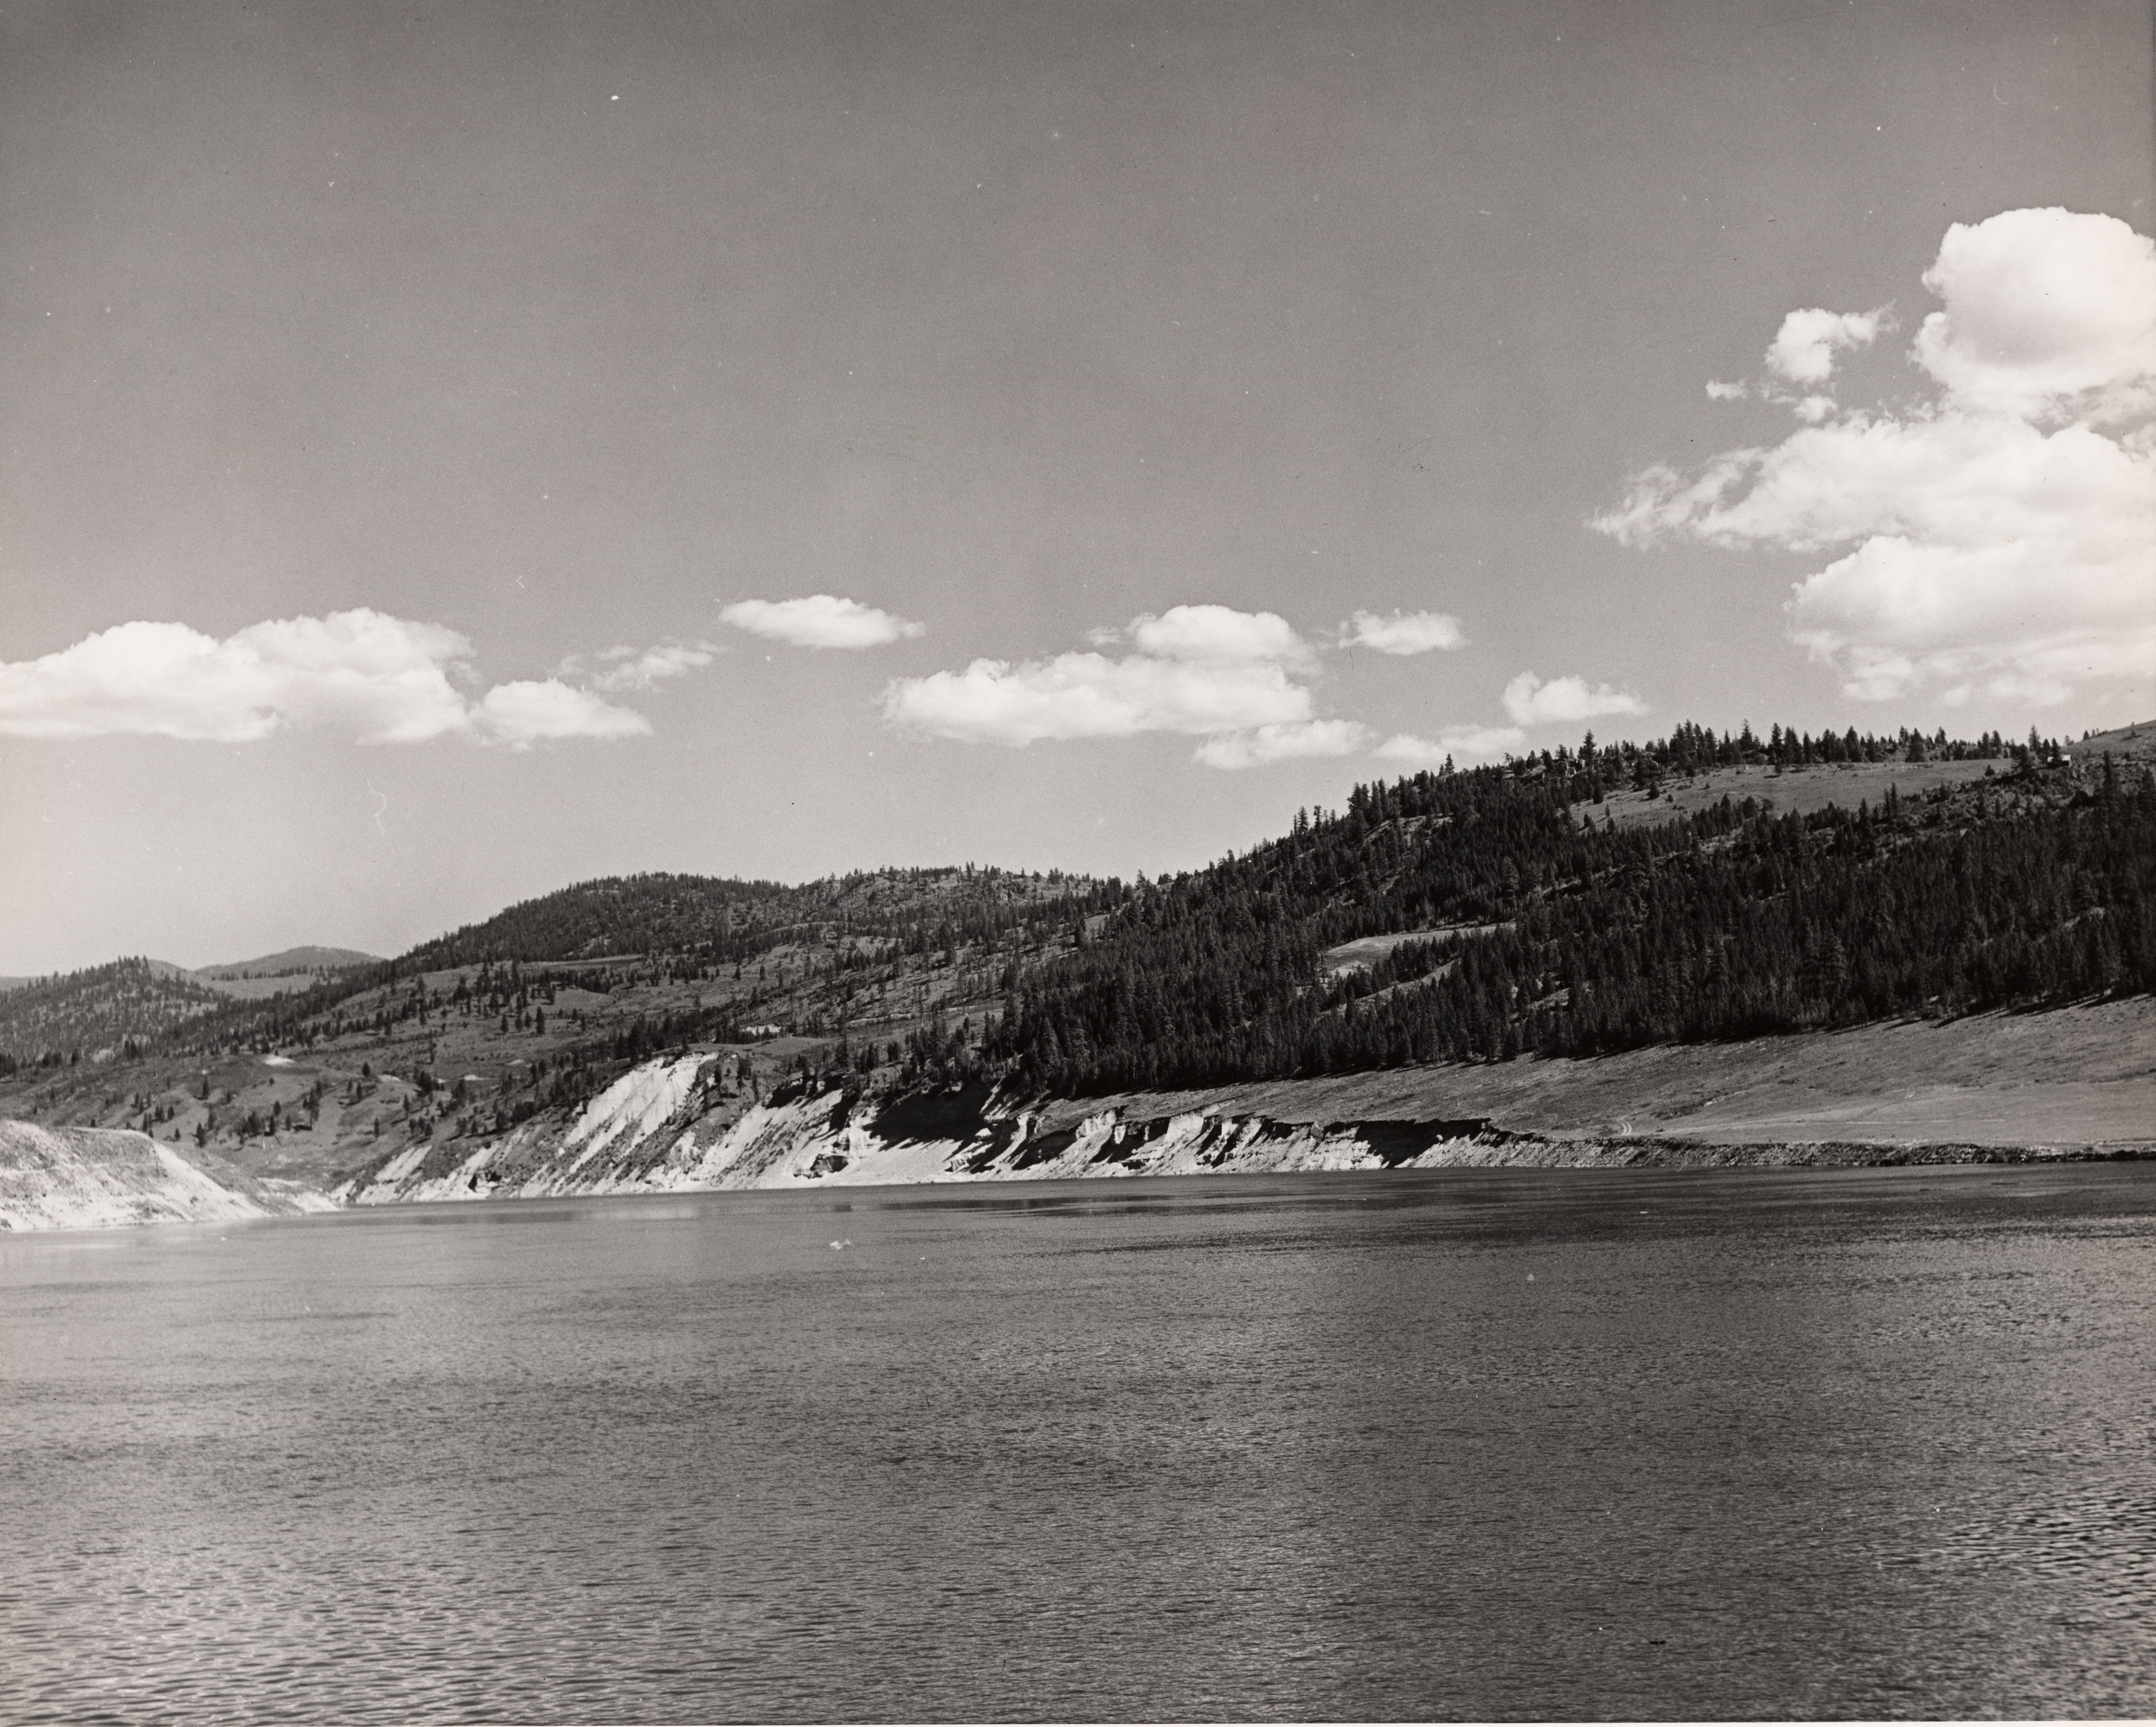 Black and white photograph of a large body of water with a hilly, partially forested shoreline